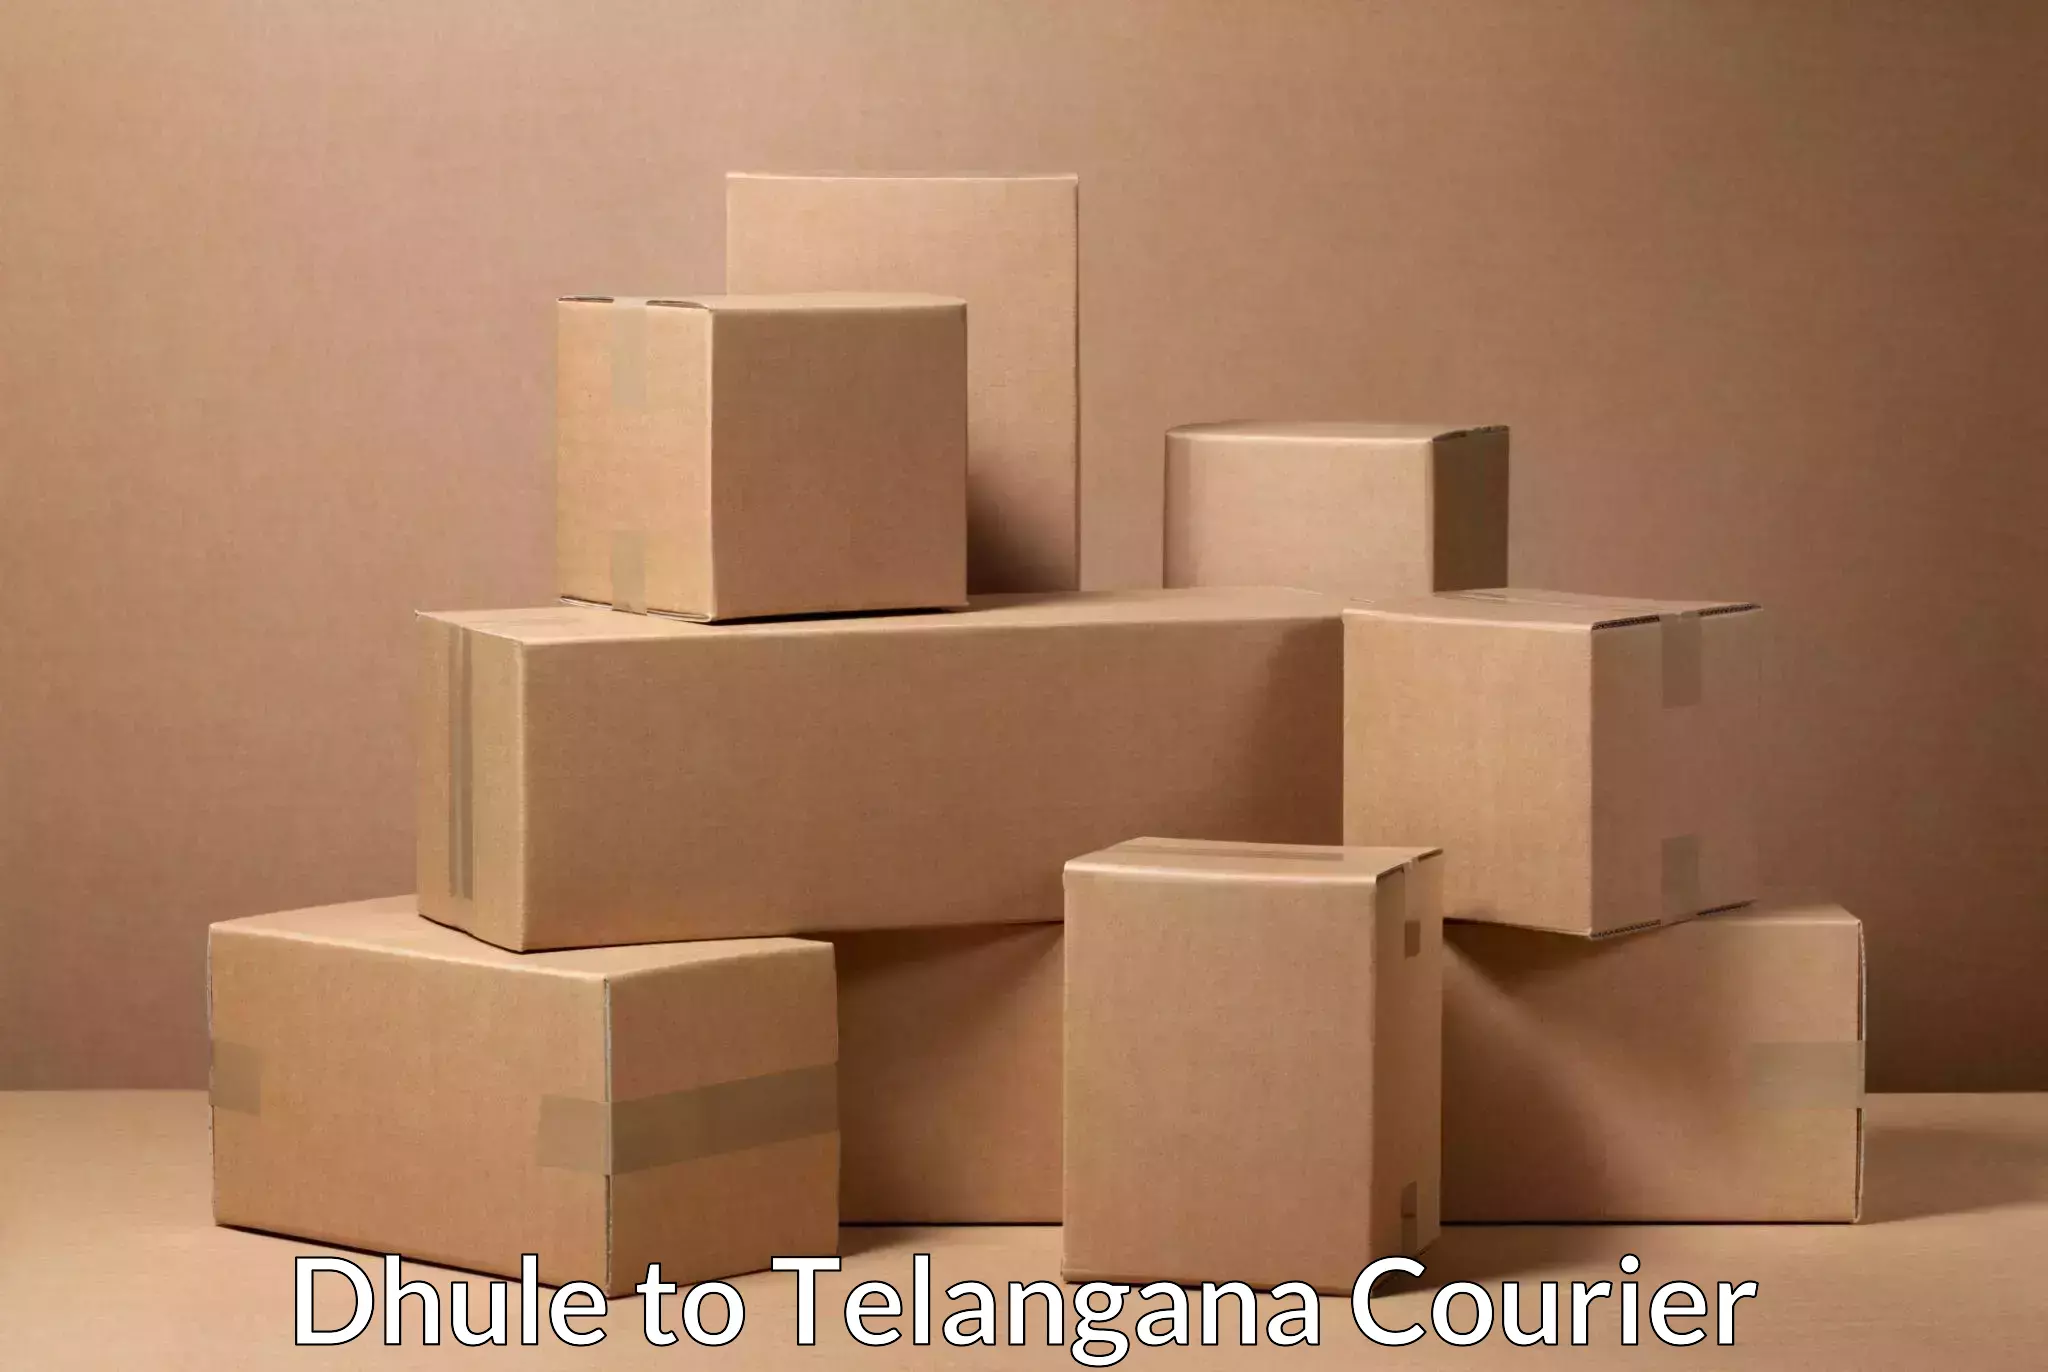 Expedited shipping methods Dhule to Secunderabad